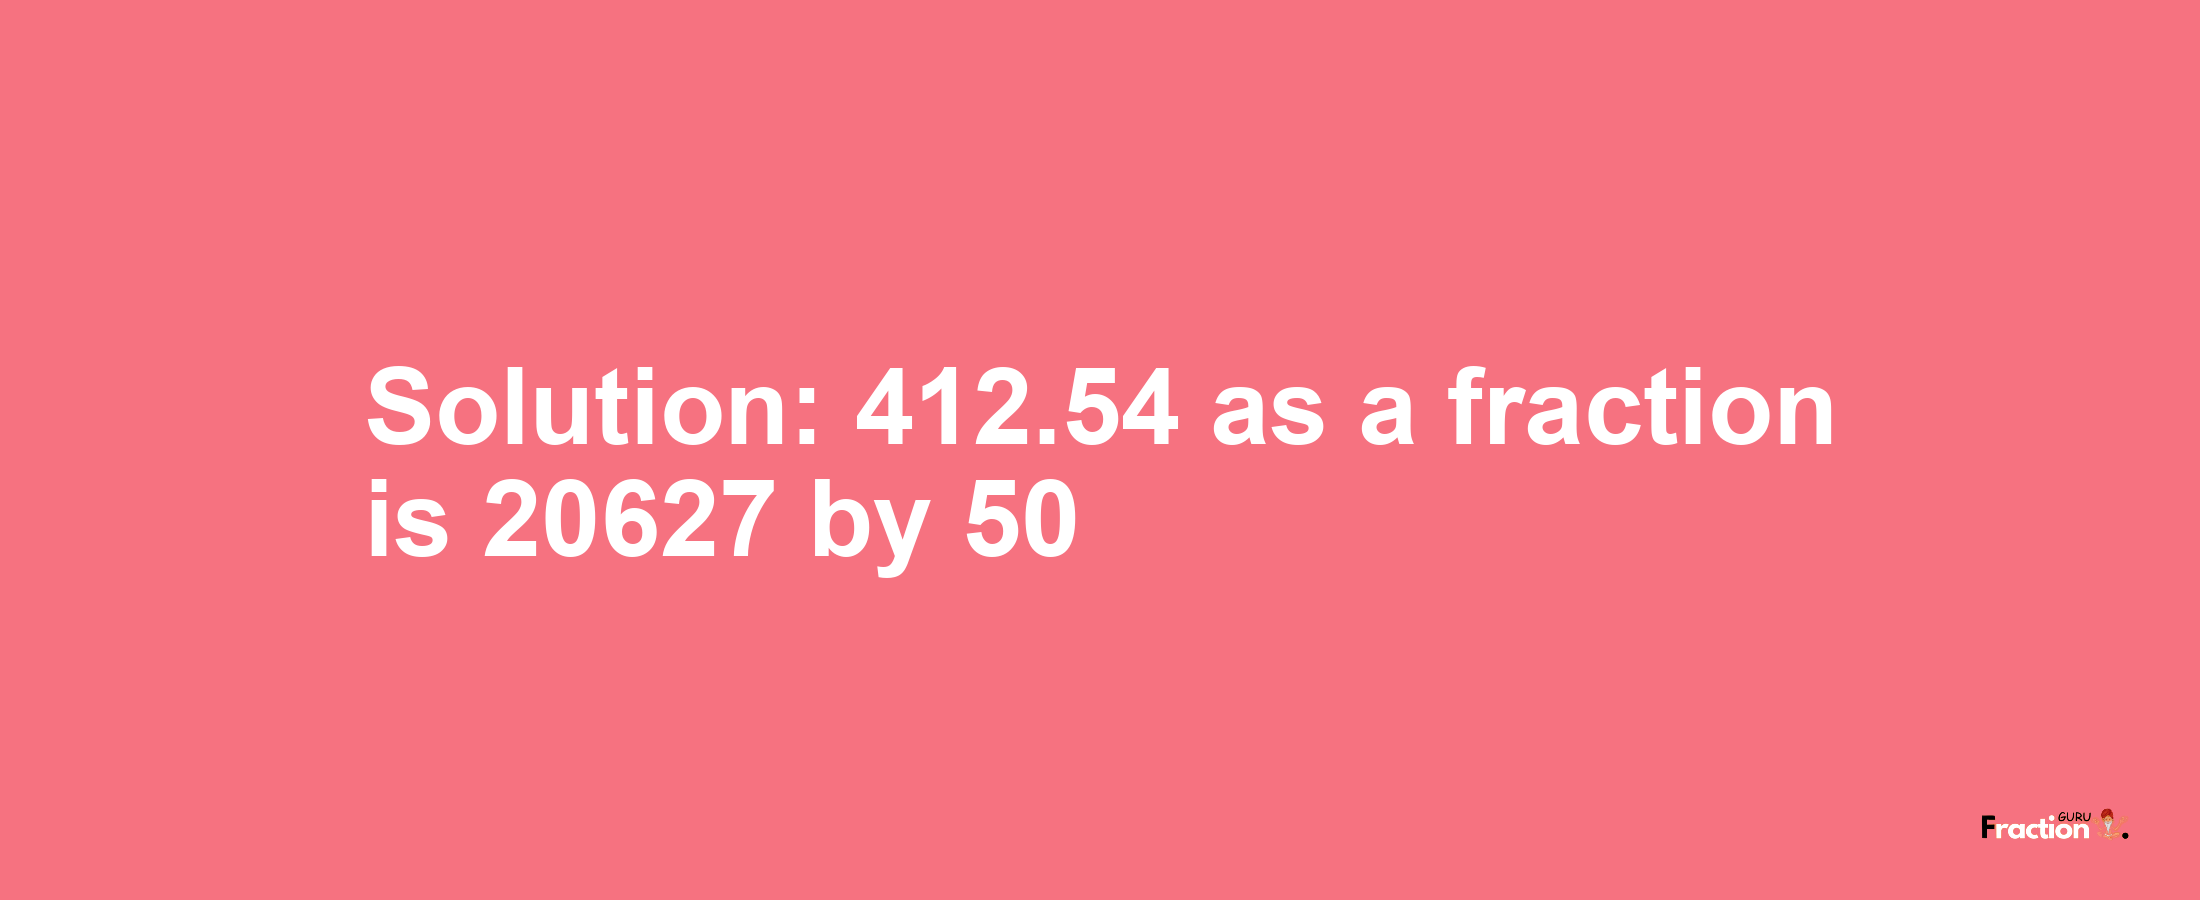 Solution:412.54 as a fraction is 20627/50